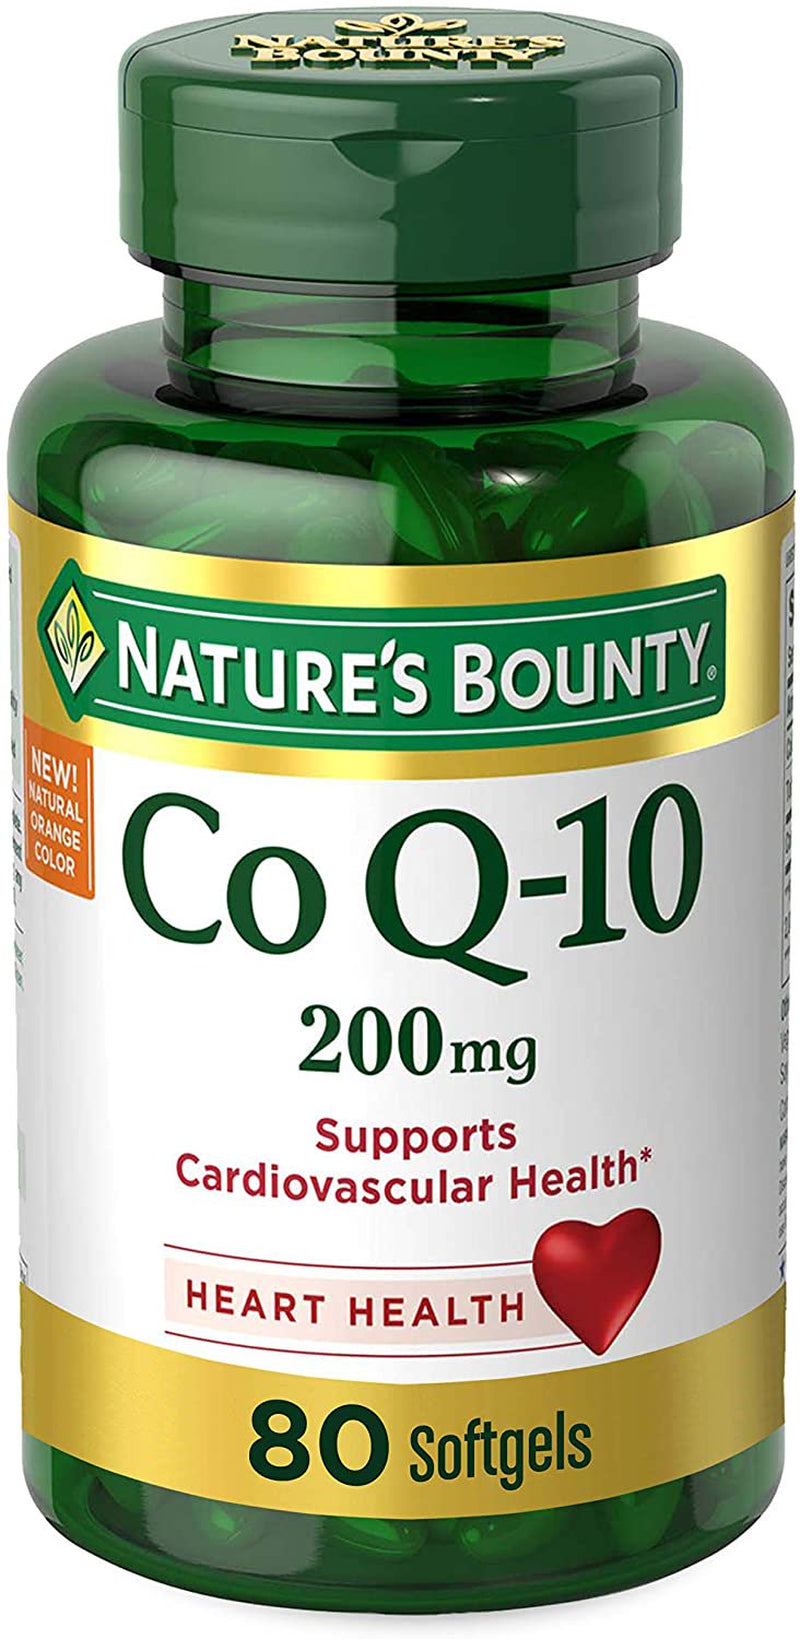 Nature'S Bounty Co Q-12 200Mg Supports Cardiovascular Health, 80 Ct, 3 Pack